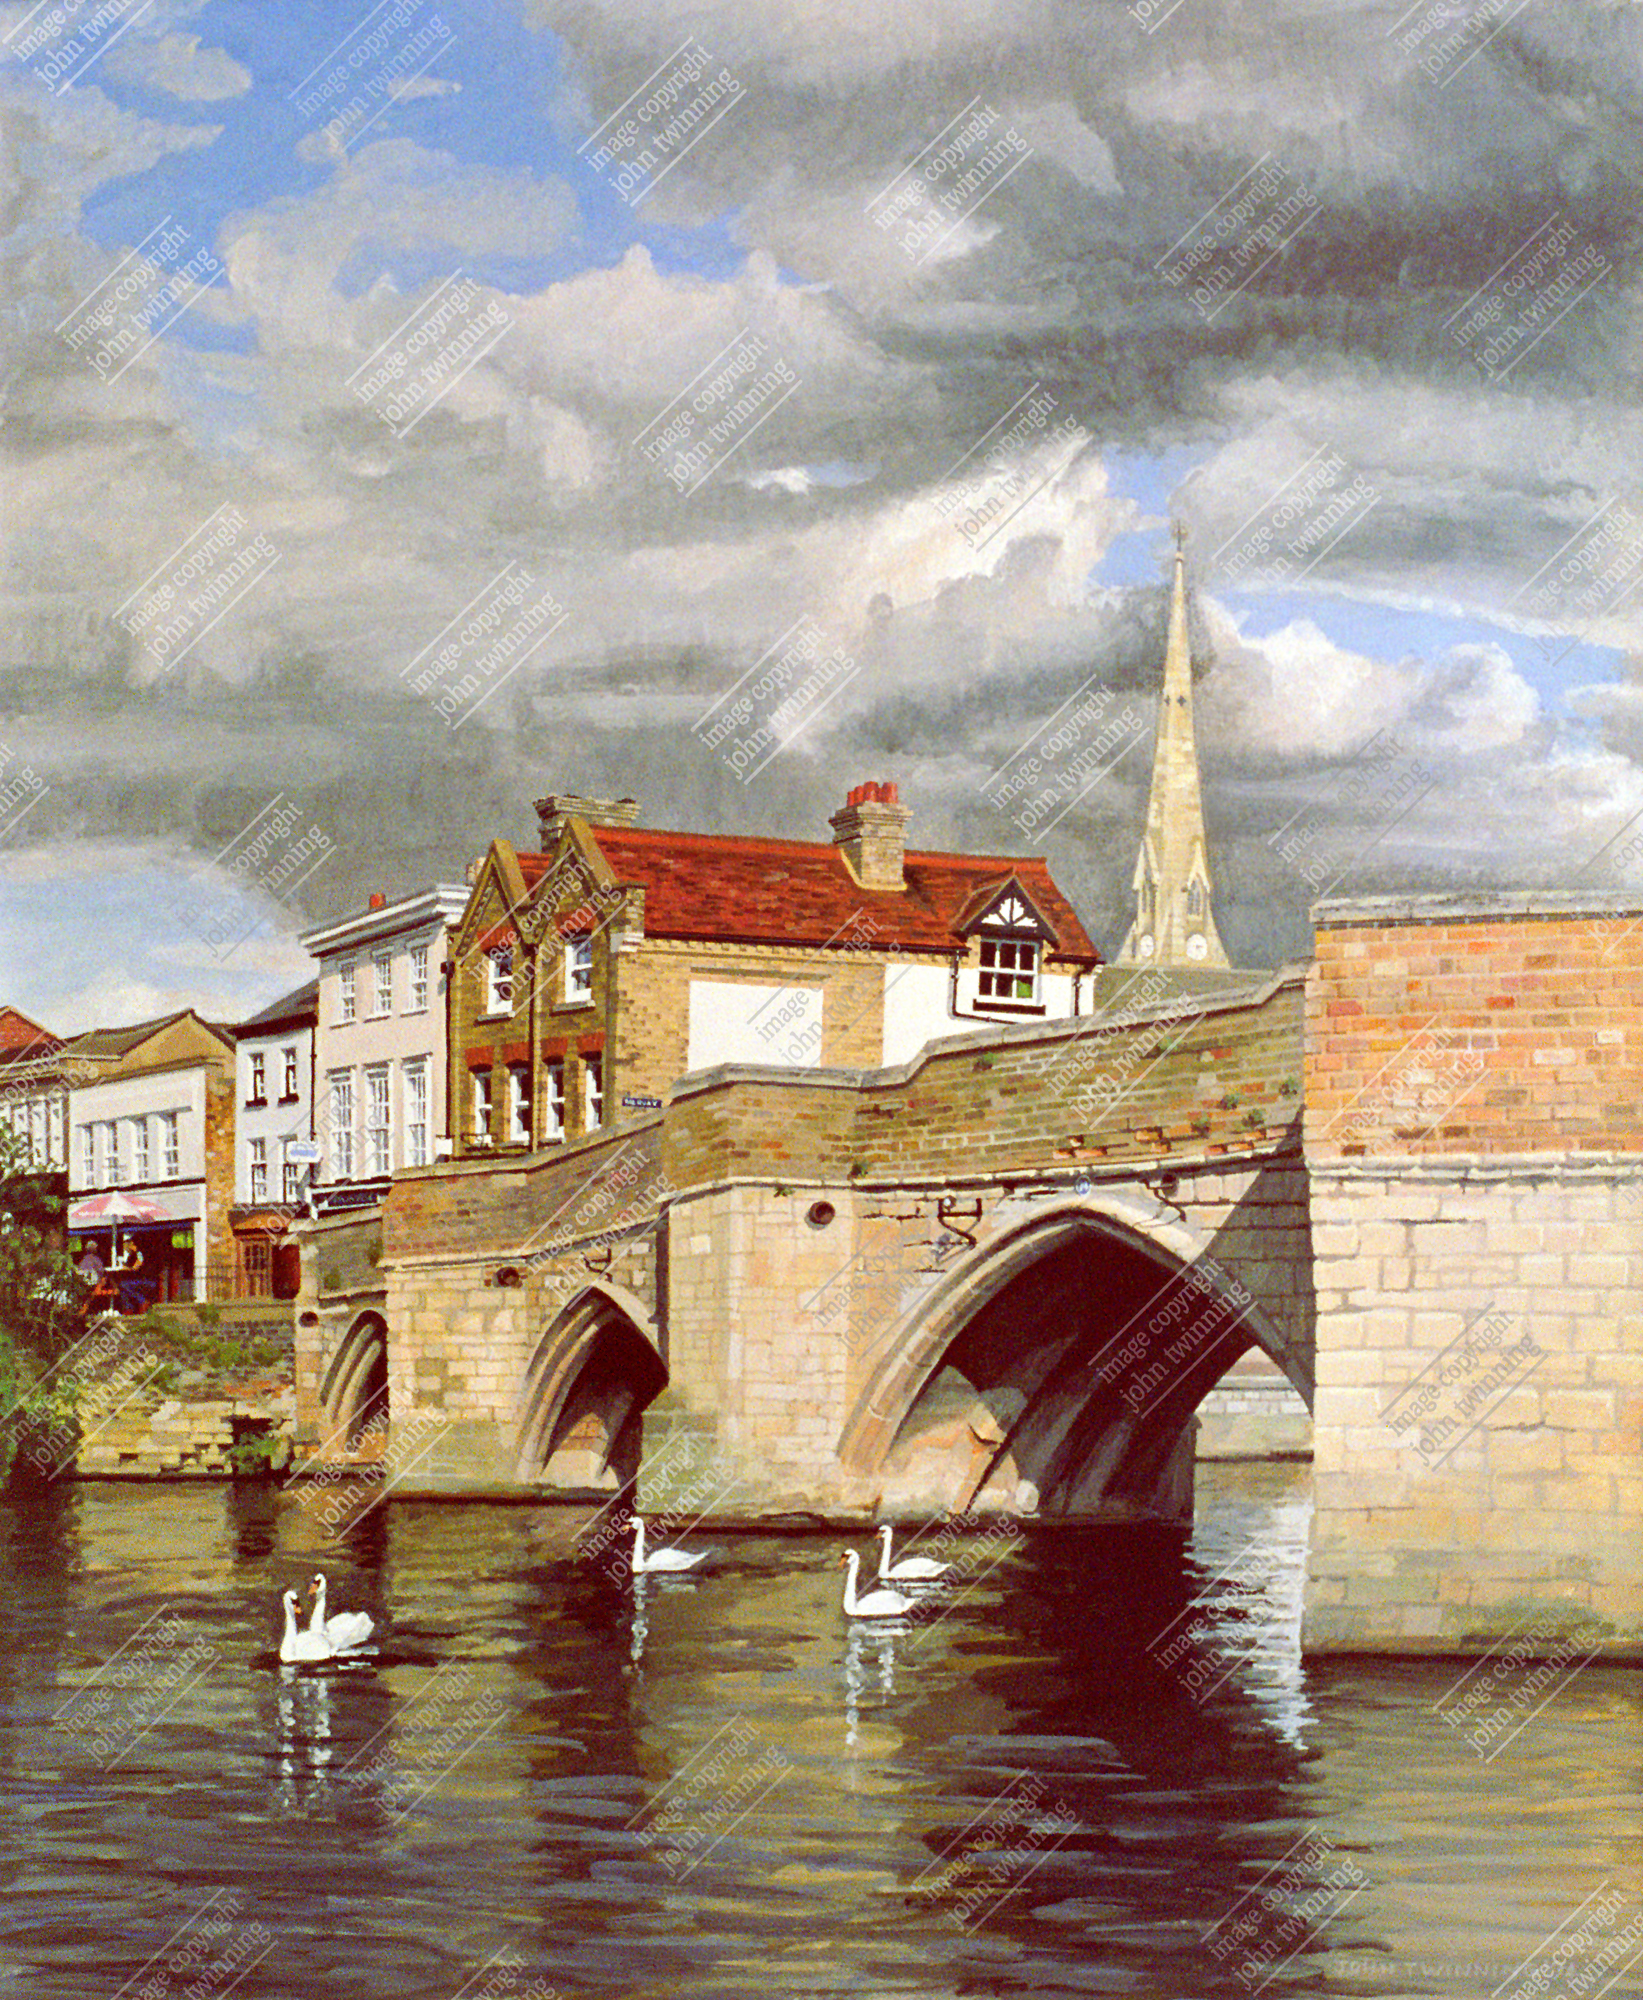 'The Bridge And Swans, St. Ives' - art print from a painting of this cambridgeshire town's bridge over the great ouse